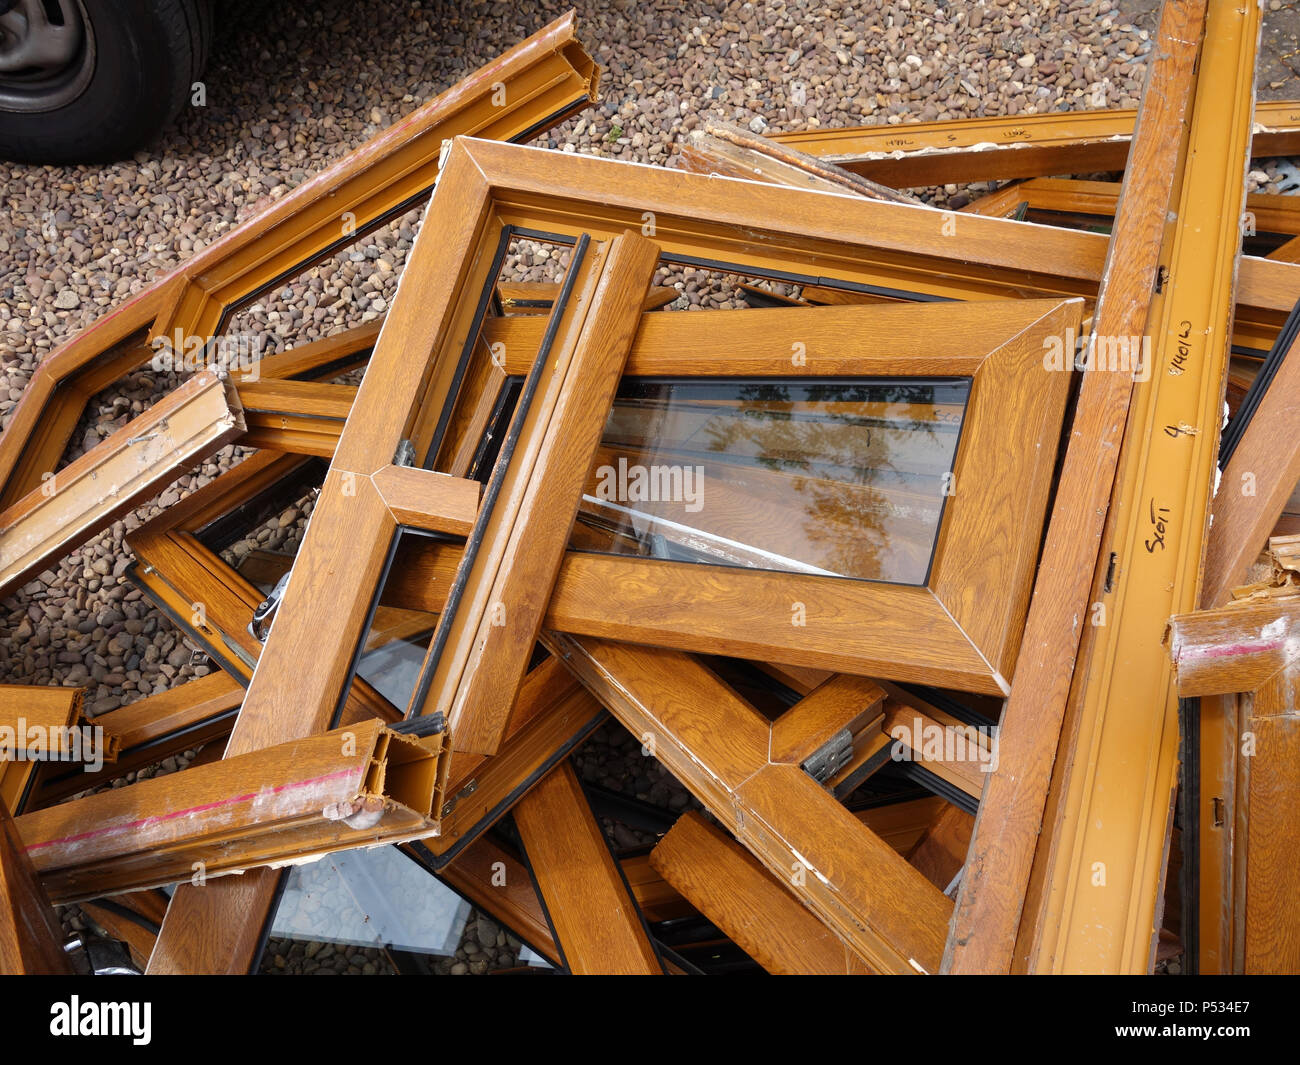 A pile of scrapped plastic wood effect ex window frames being replaced with solid oak. More plastic and glass waste destined for disposal to landfill Stock Photo